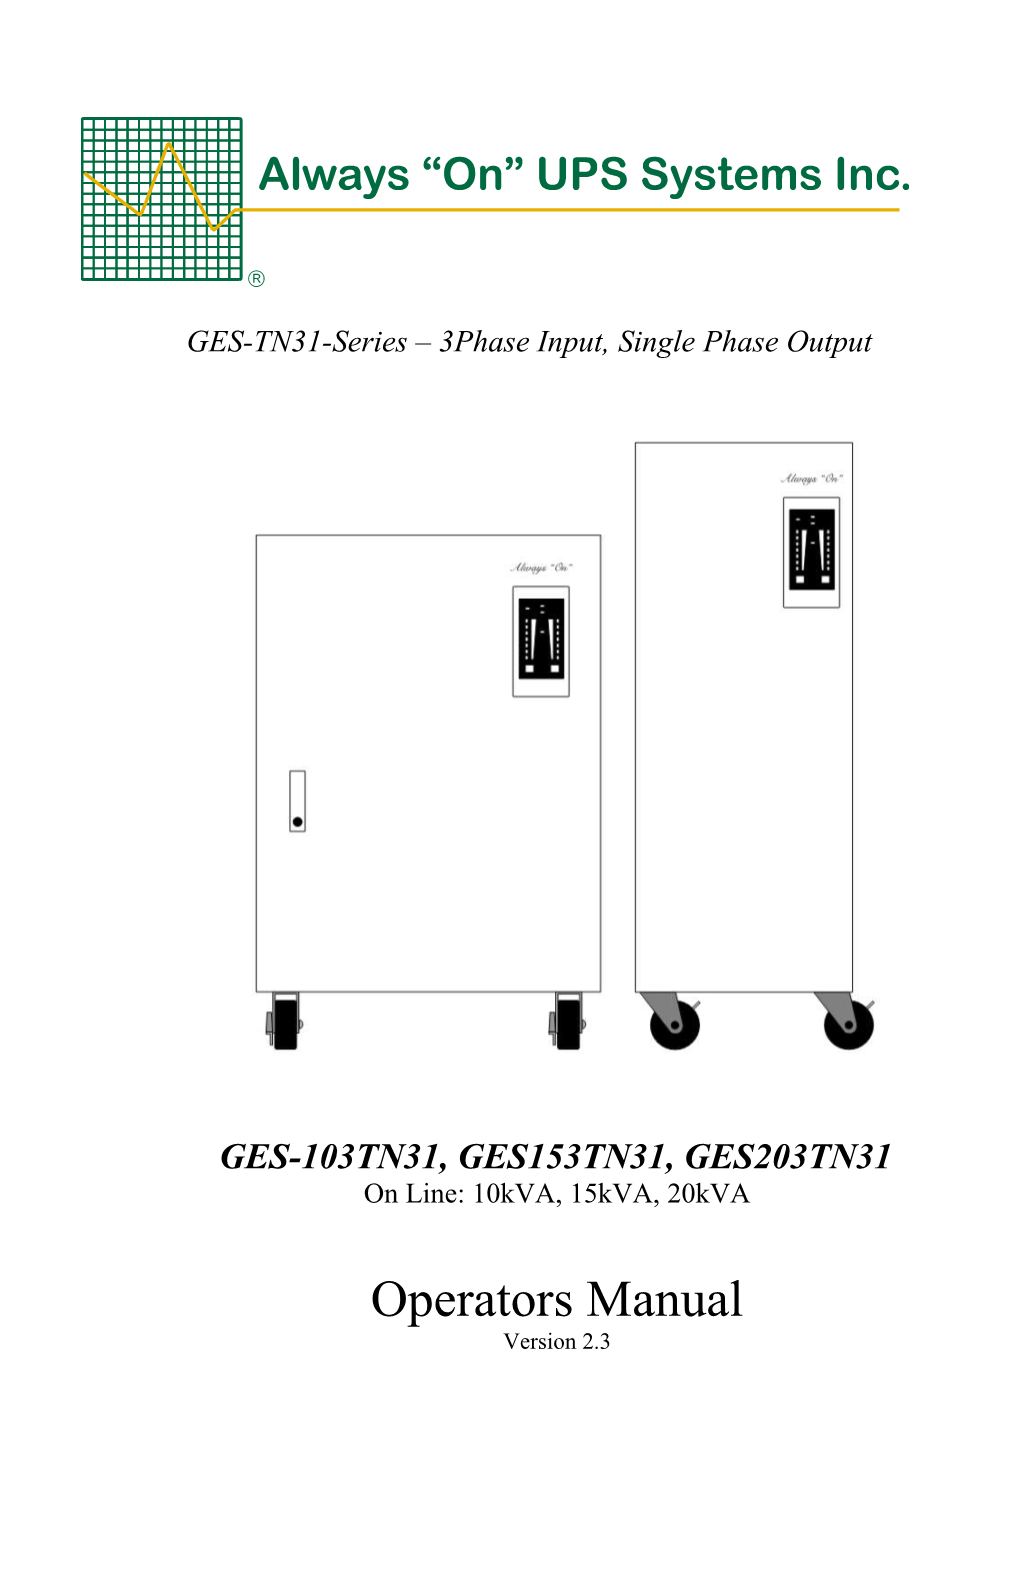 GES-TN31-Series 3Phase Input, Single Phase Output